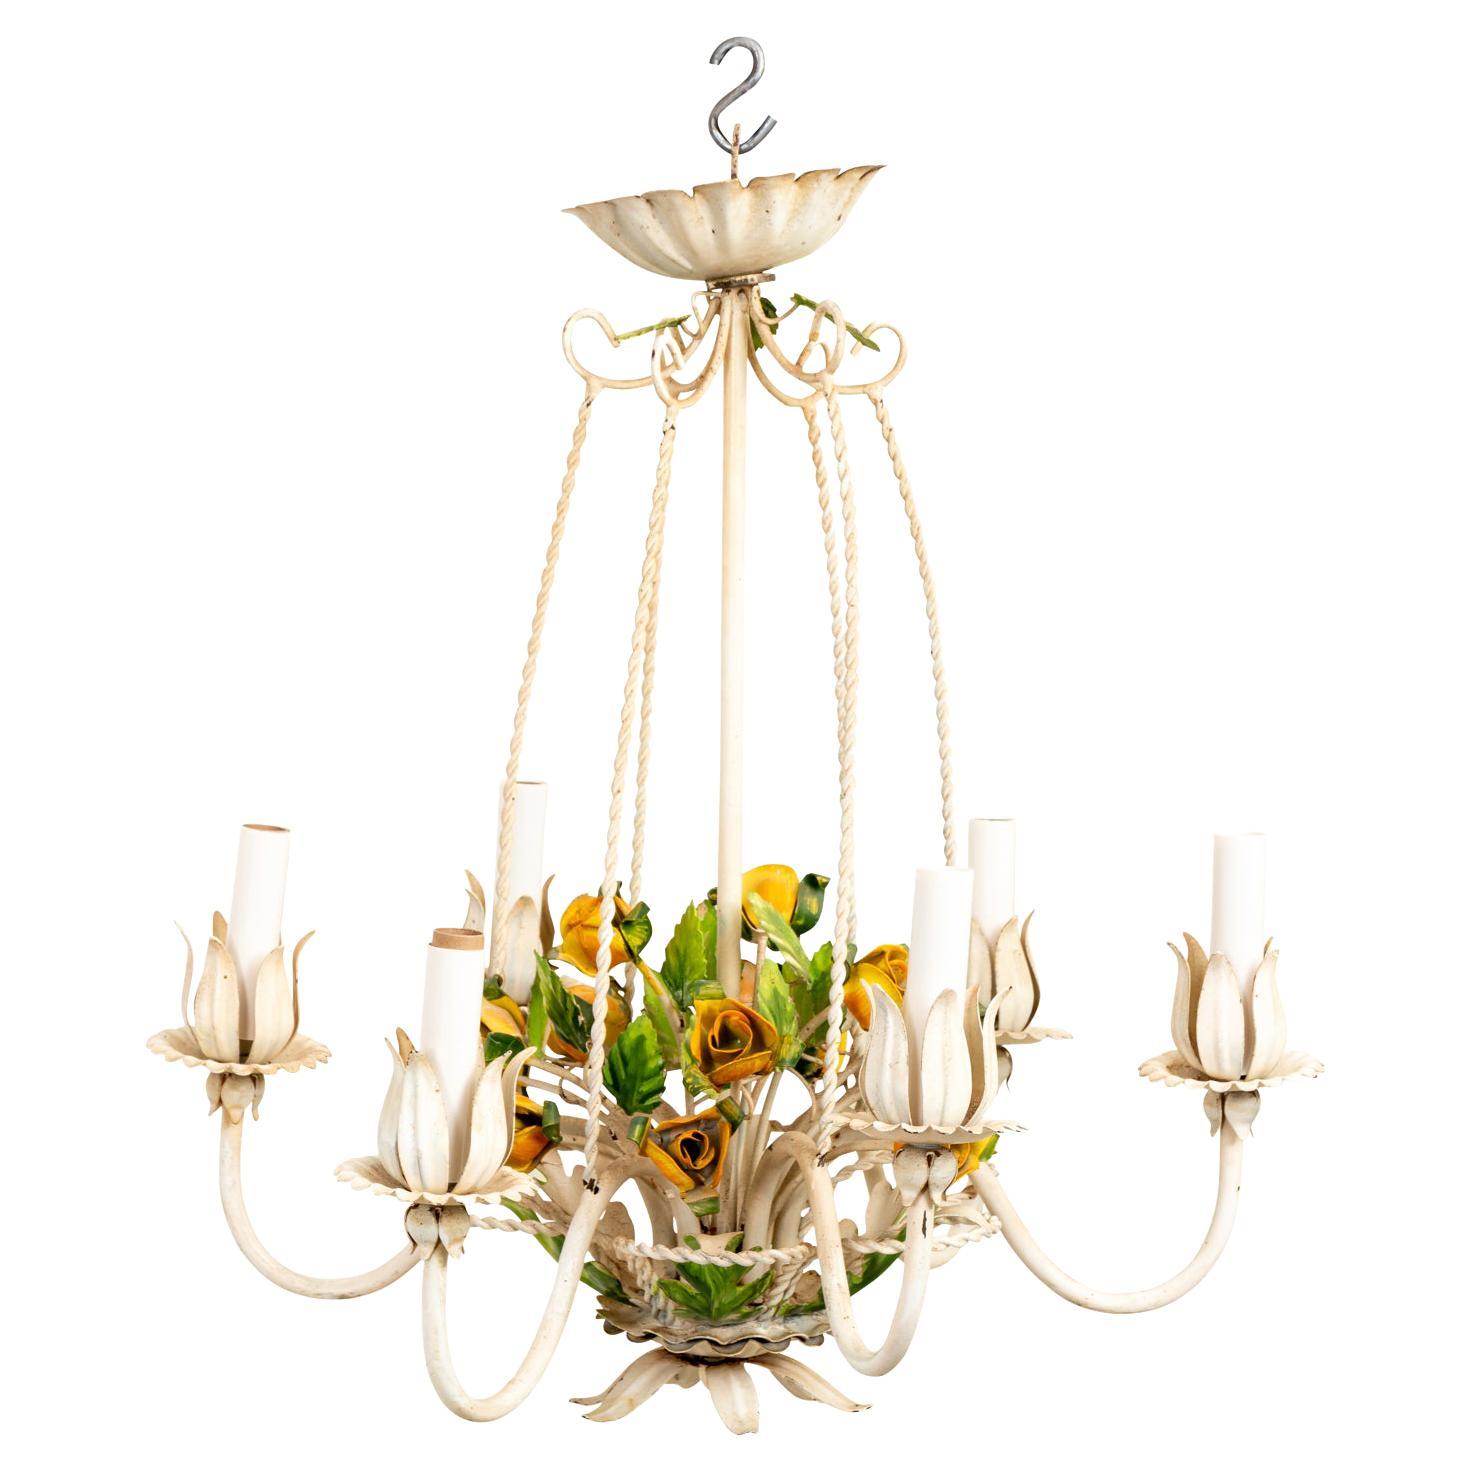 Italian Tole Floral Chandelier with Roses